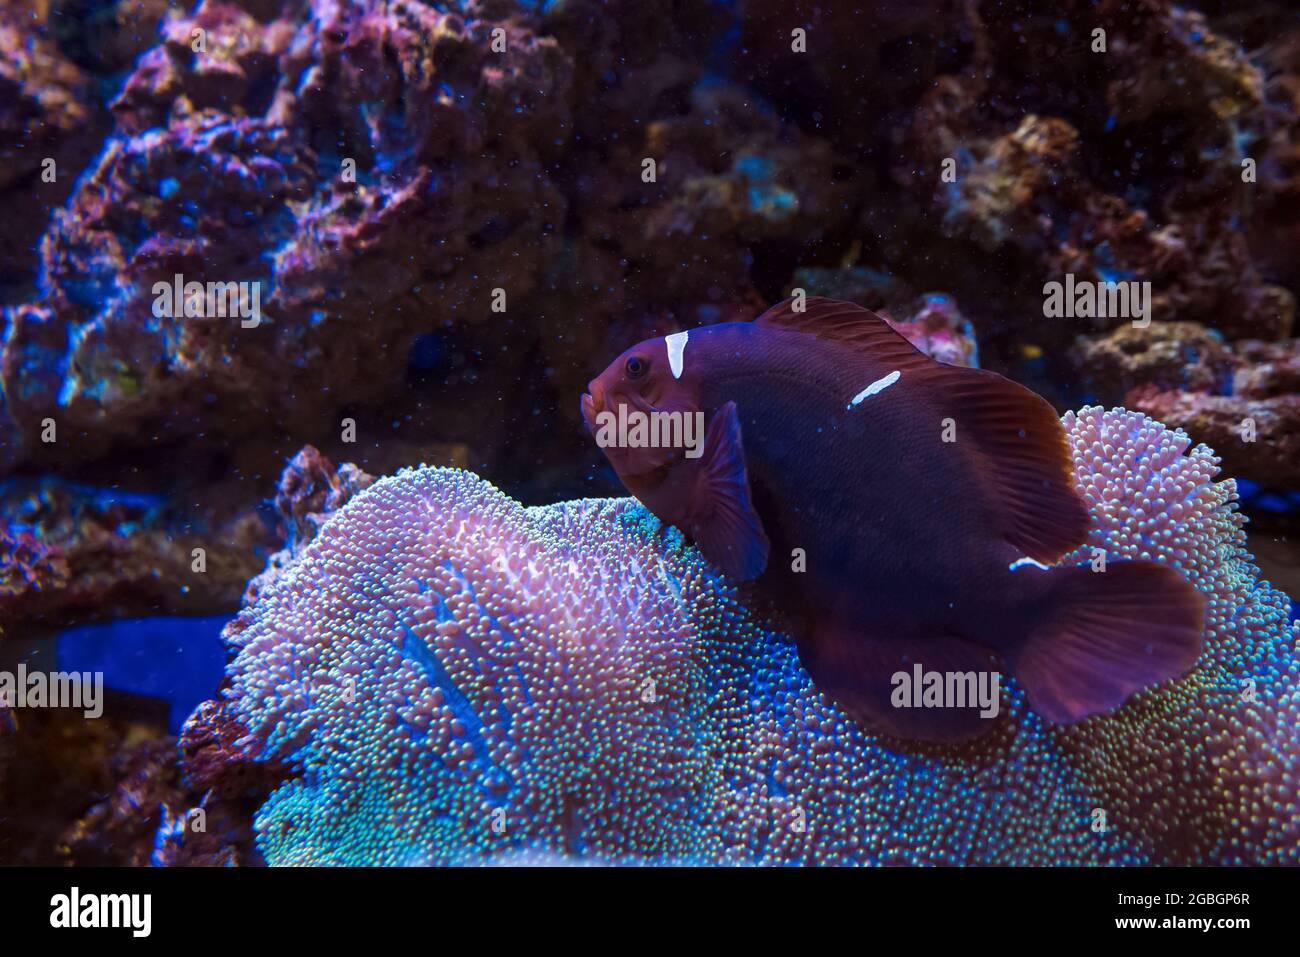 close up view of maroon clownfish swimming over soft coral - umbrella leather, toadstool mushroom leather coral - Sarcophyton sp Stock Photo